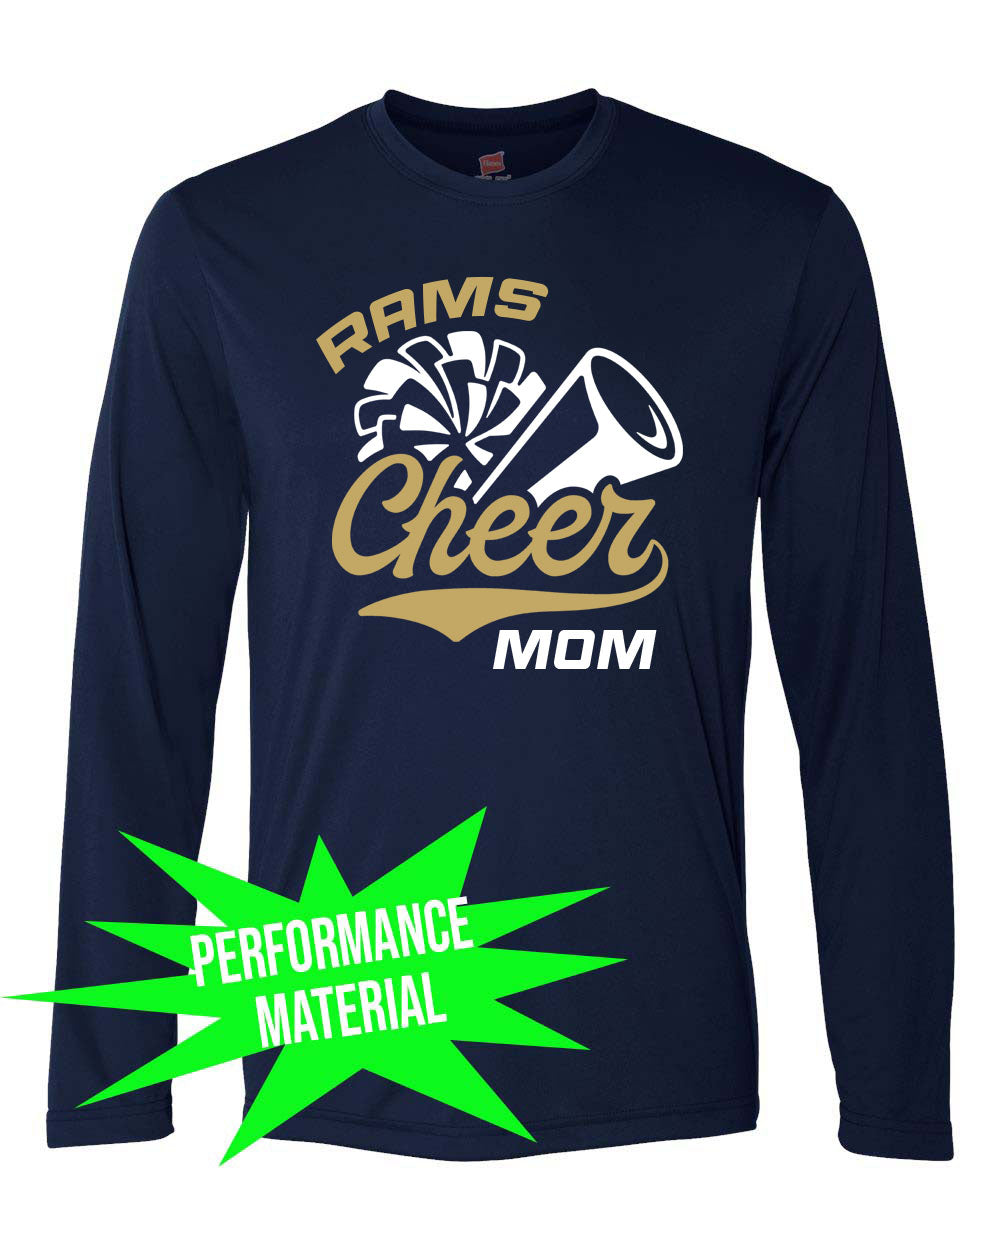 Sussex Middle Cheer Performance Material Design 1 Long Sleeve Shirt